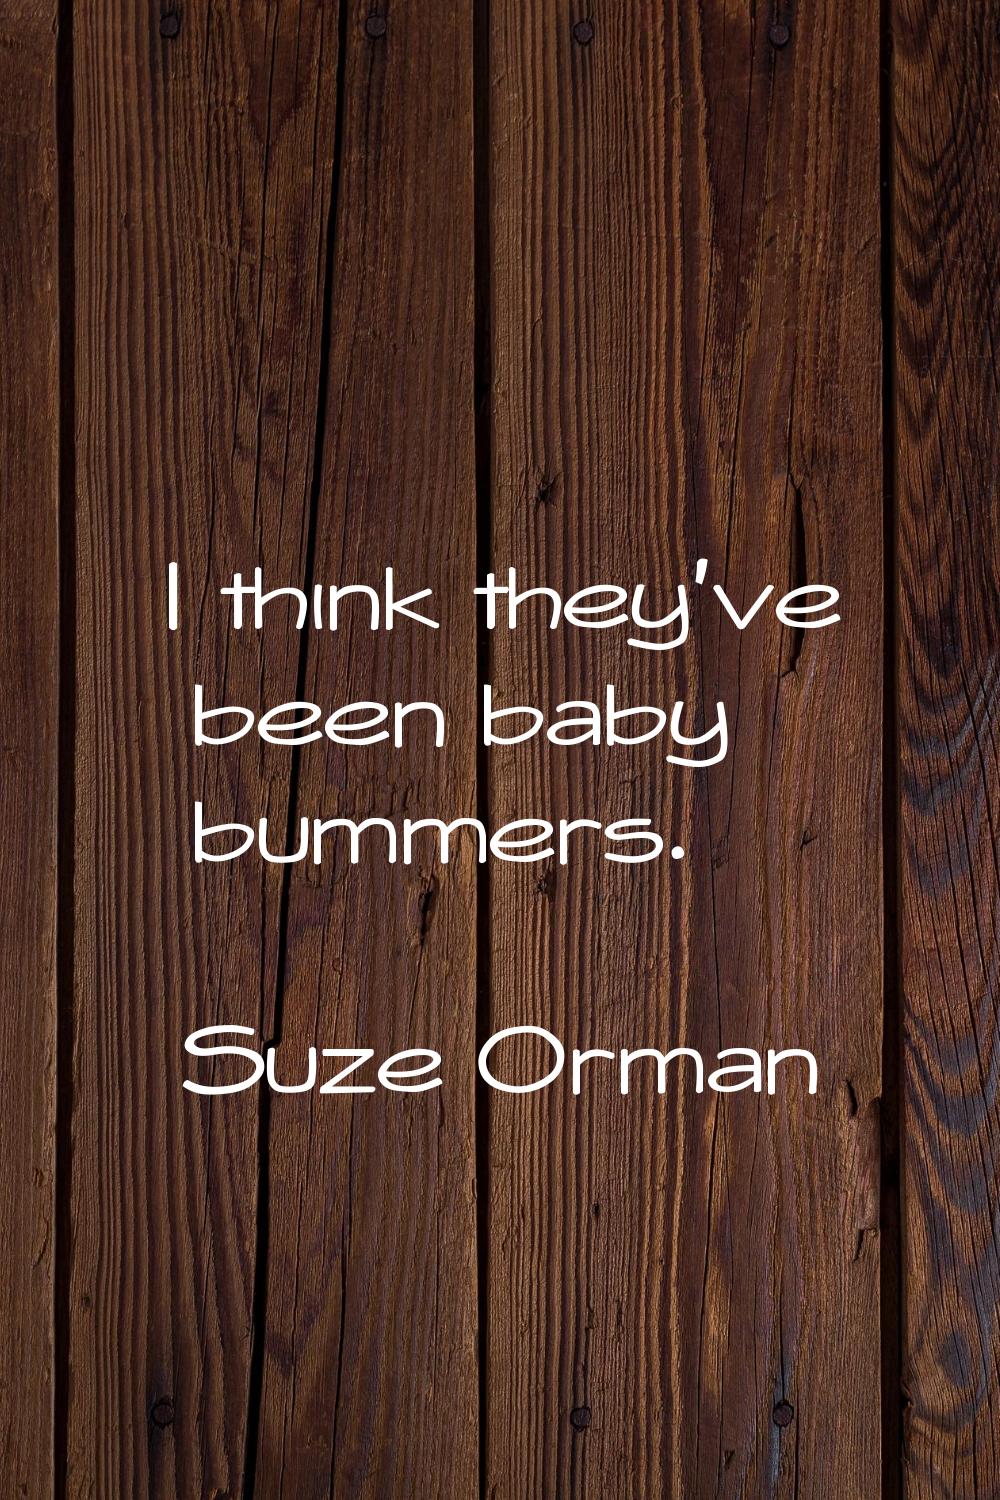 I think they've been baby bummers.